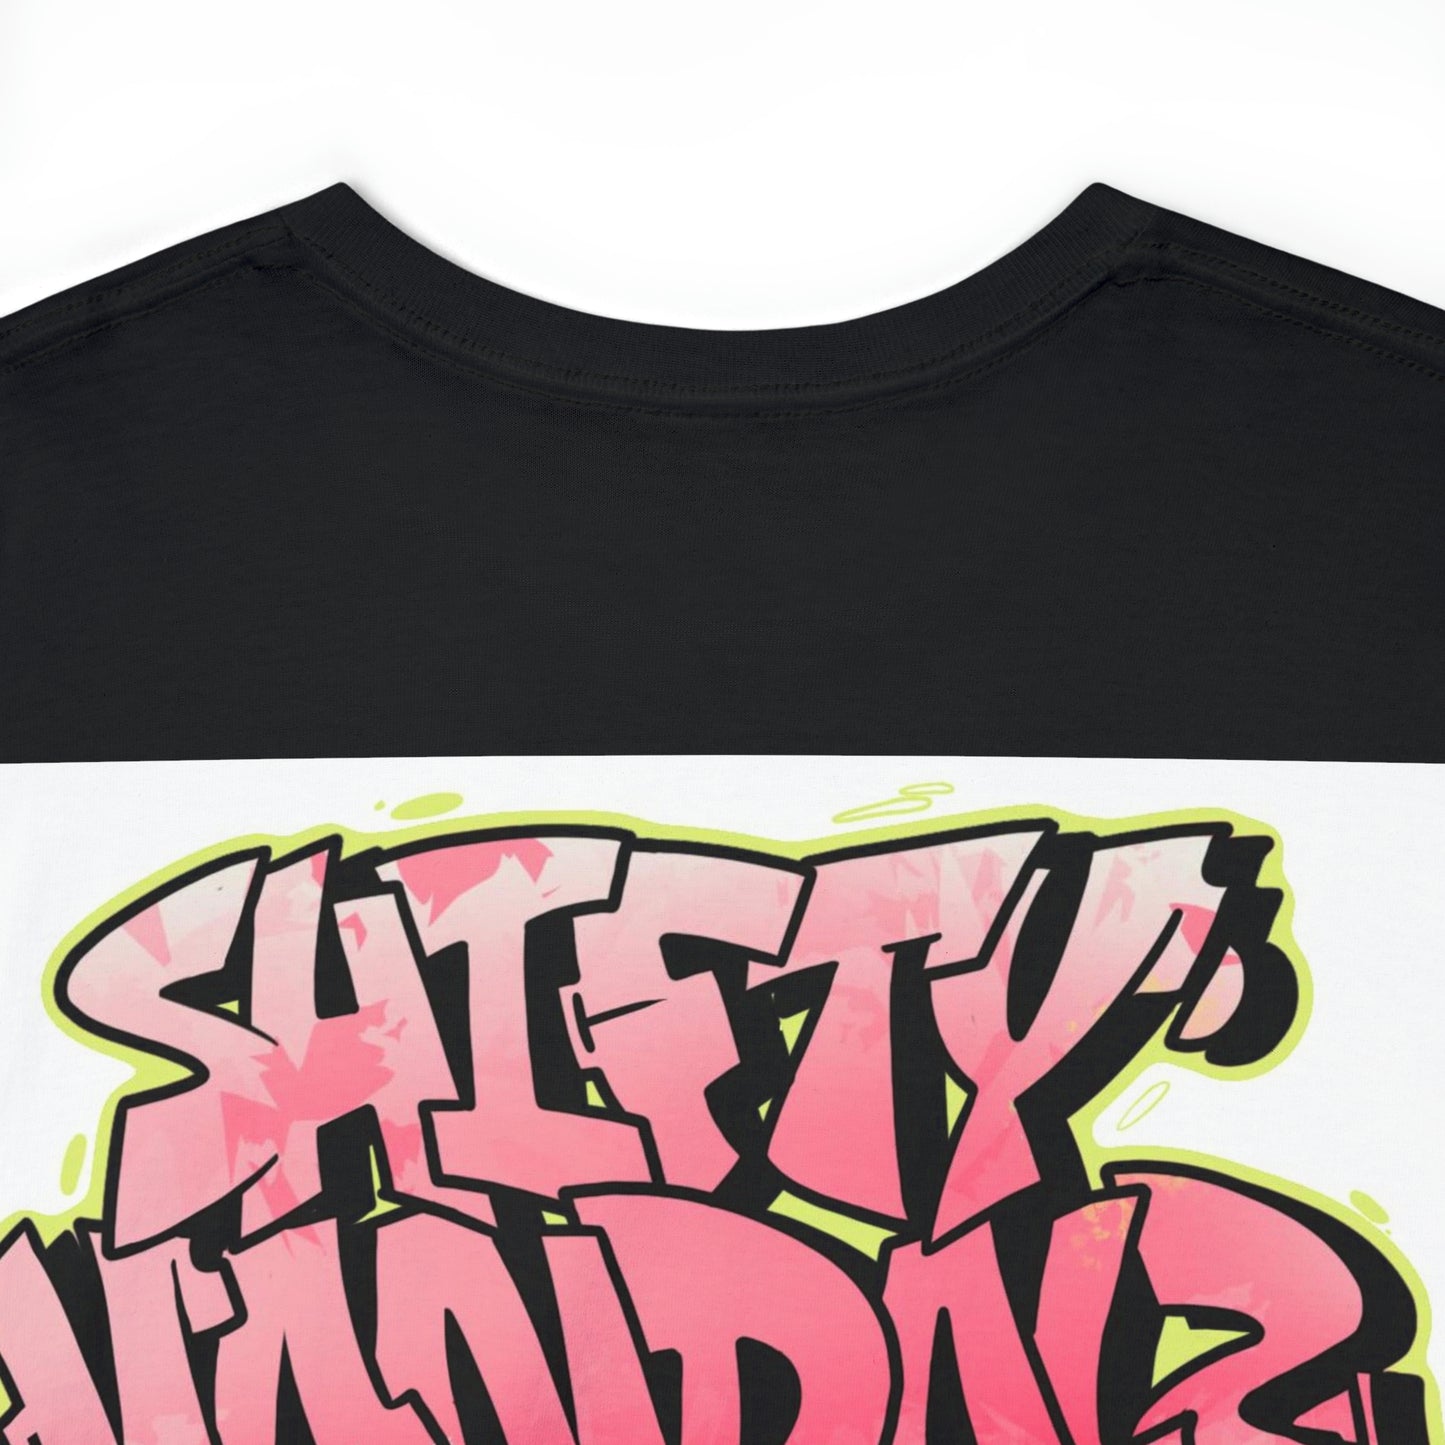 Official Shifty vandalz tee(Images switched)